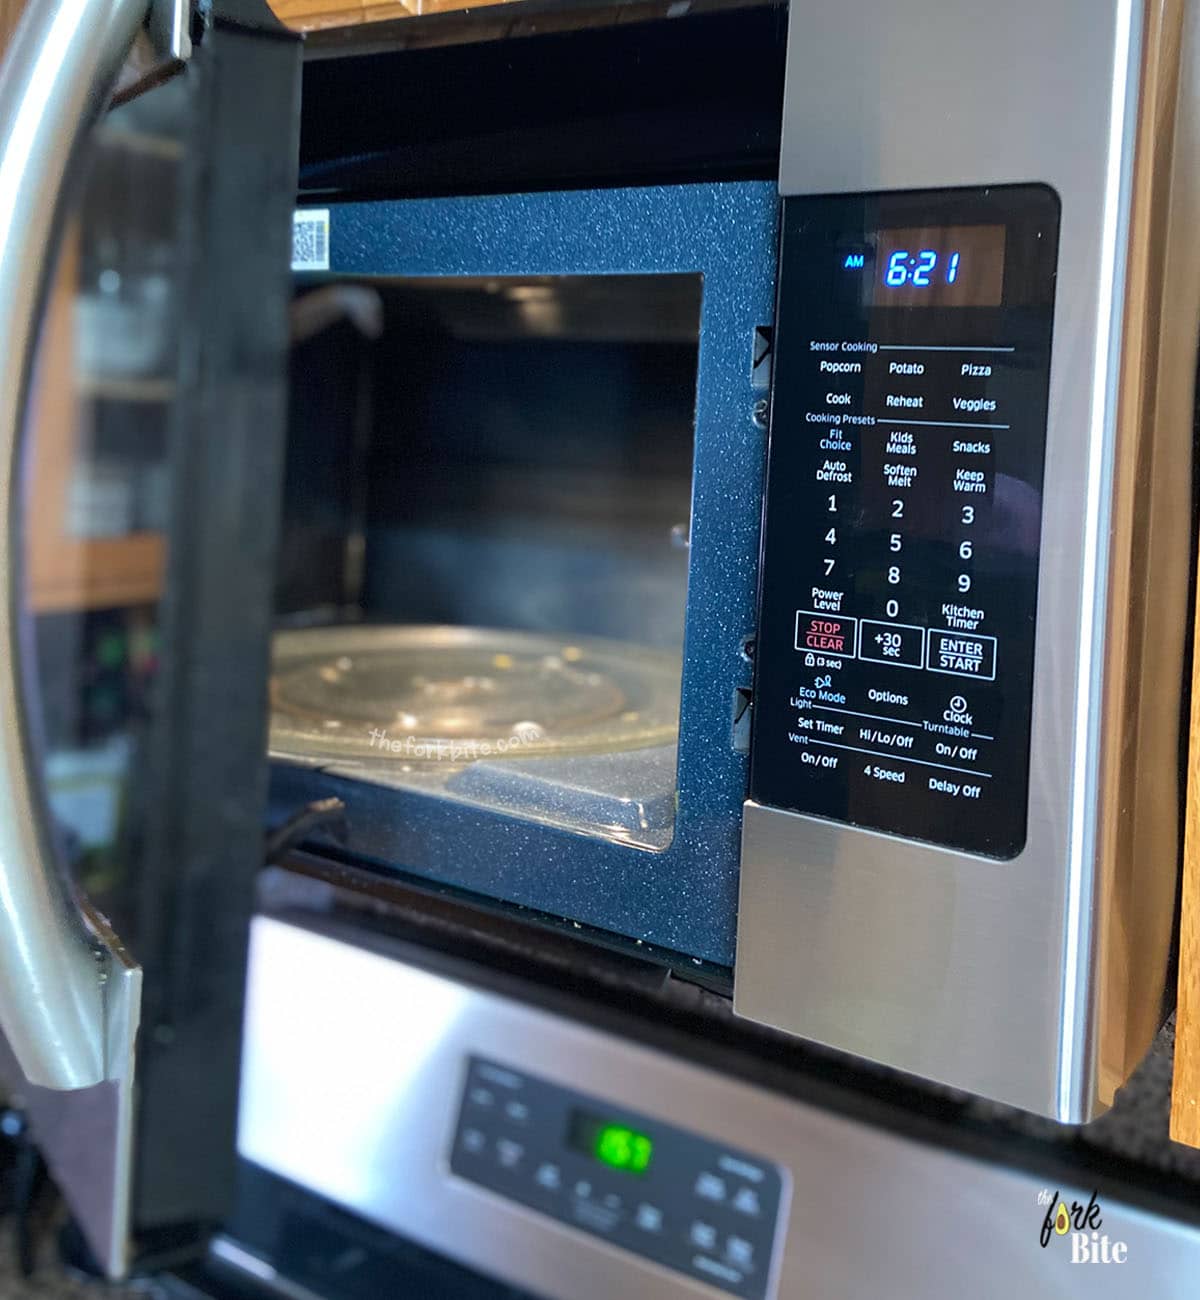 Many of the microwaves sold here in the US allow you to adjust the power setting from 1 to 10. It turns out that these numbers are percentages.